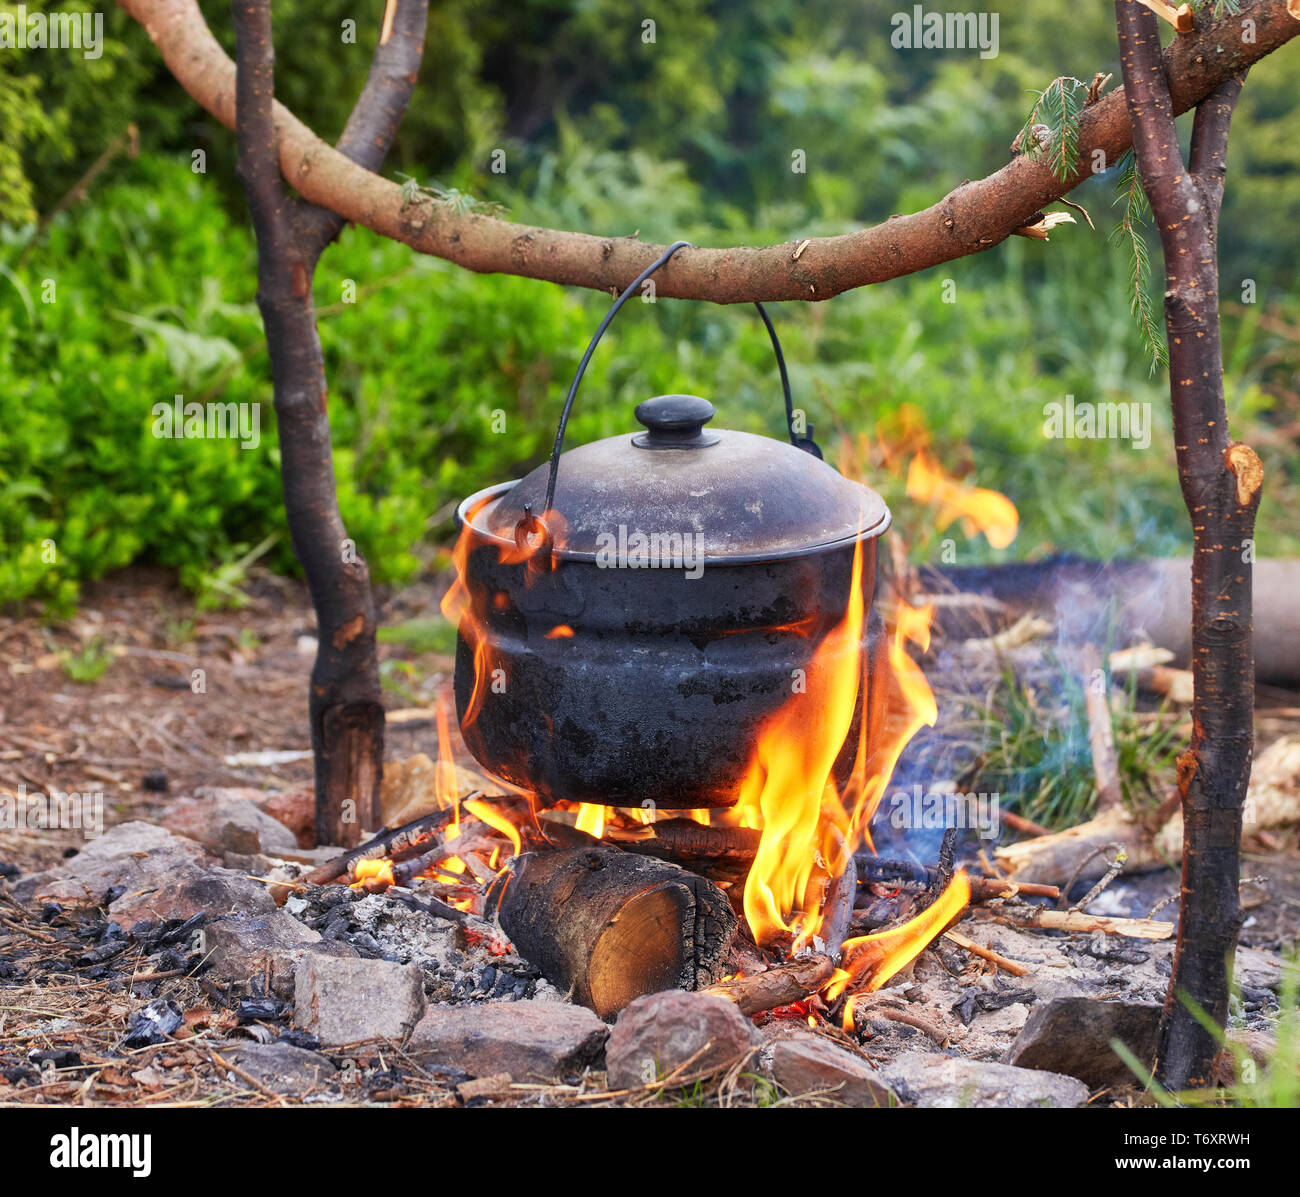 https://c8.alamy.com/comp/T6XRWH/old-small-kettle-is-heated-on-a-bonfire-on-a-green-mountain-meadow-during-a-bad-weather-epic-travel-in-the-mountains-T6XRWH.jpg